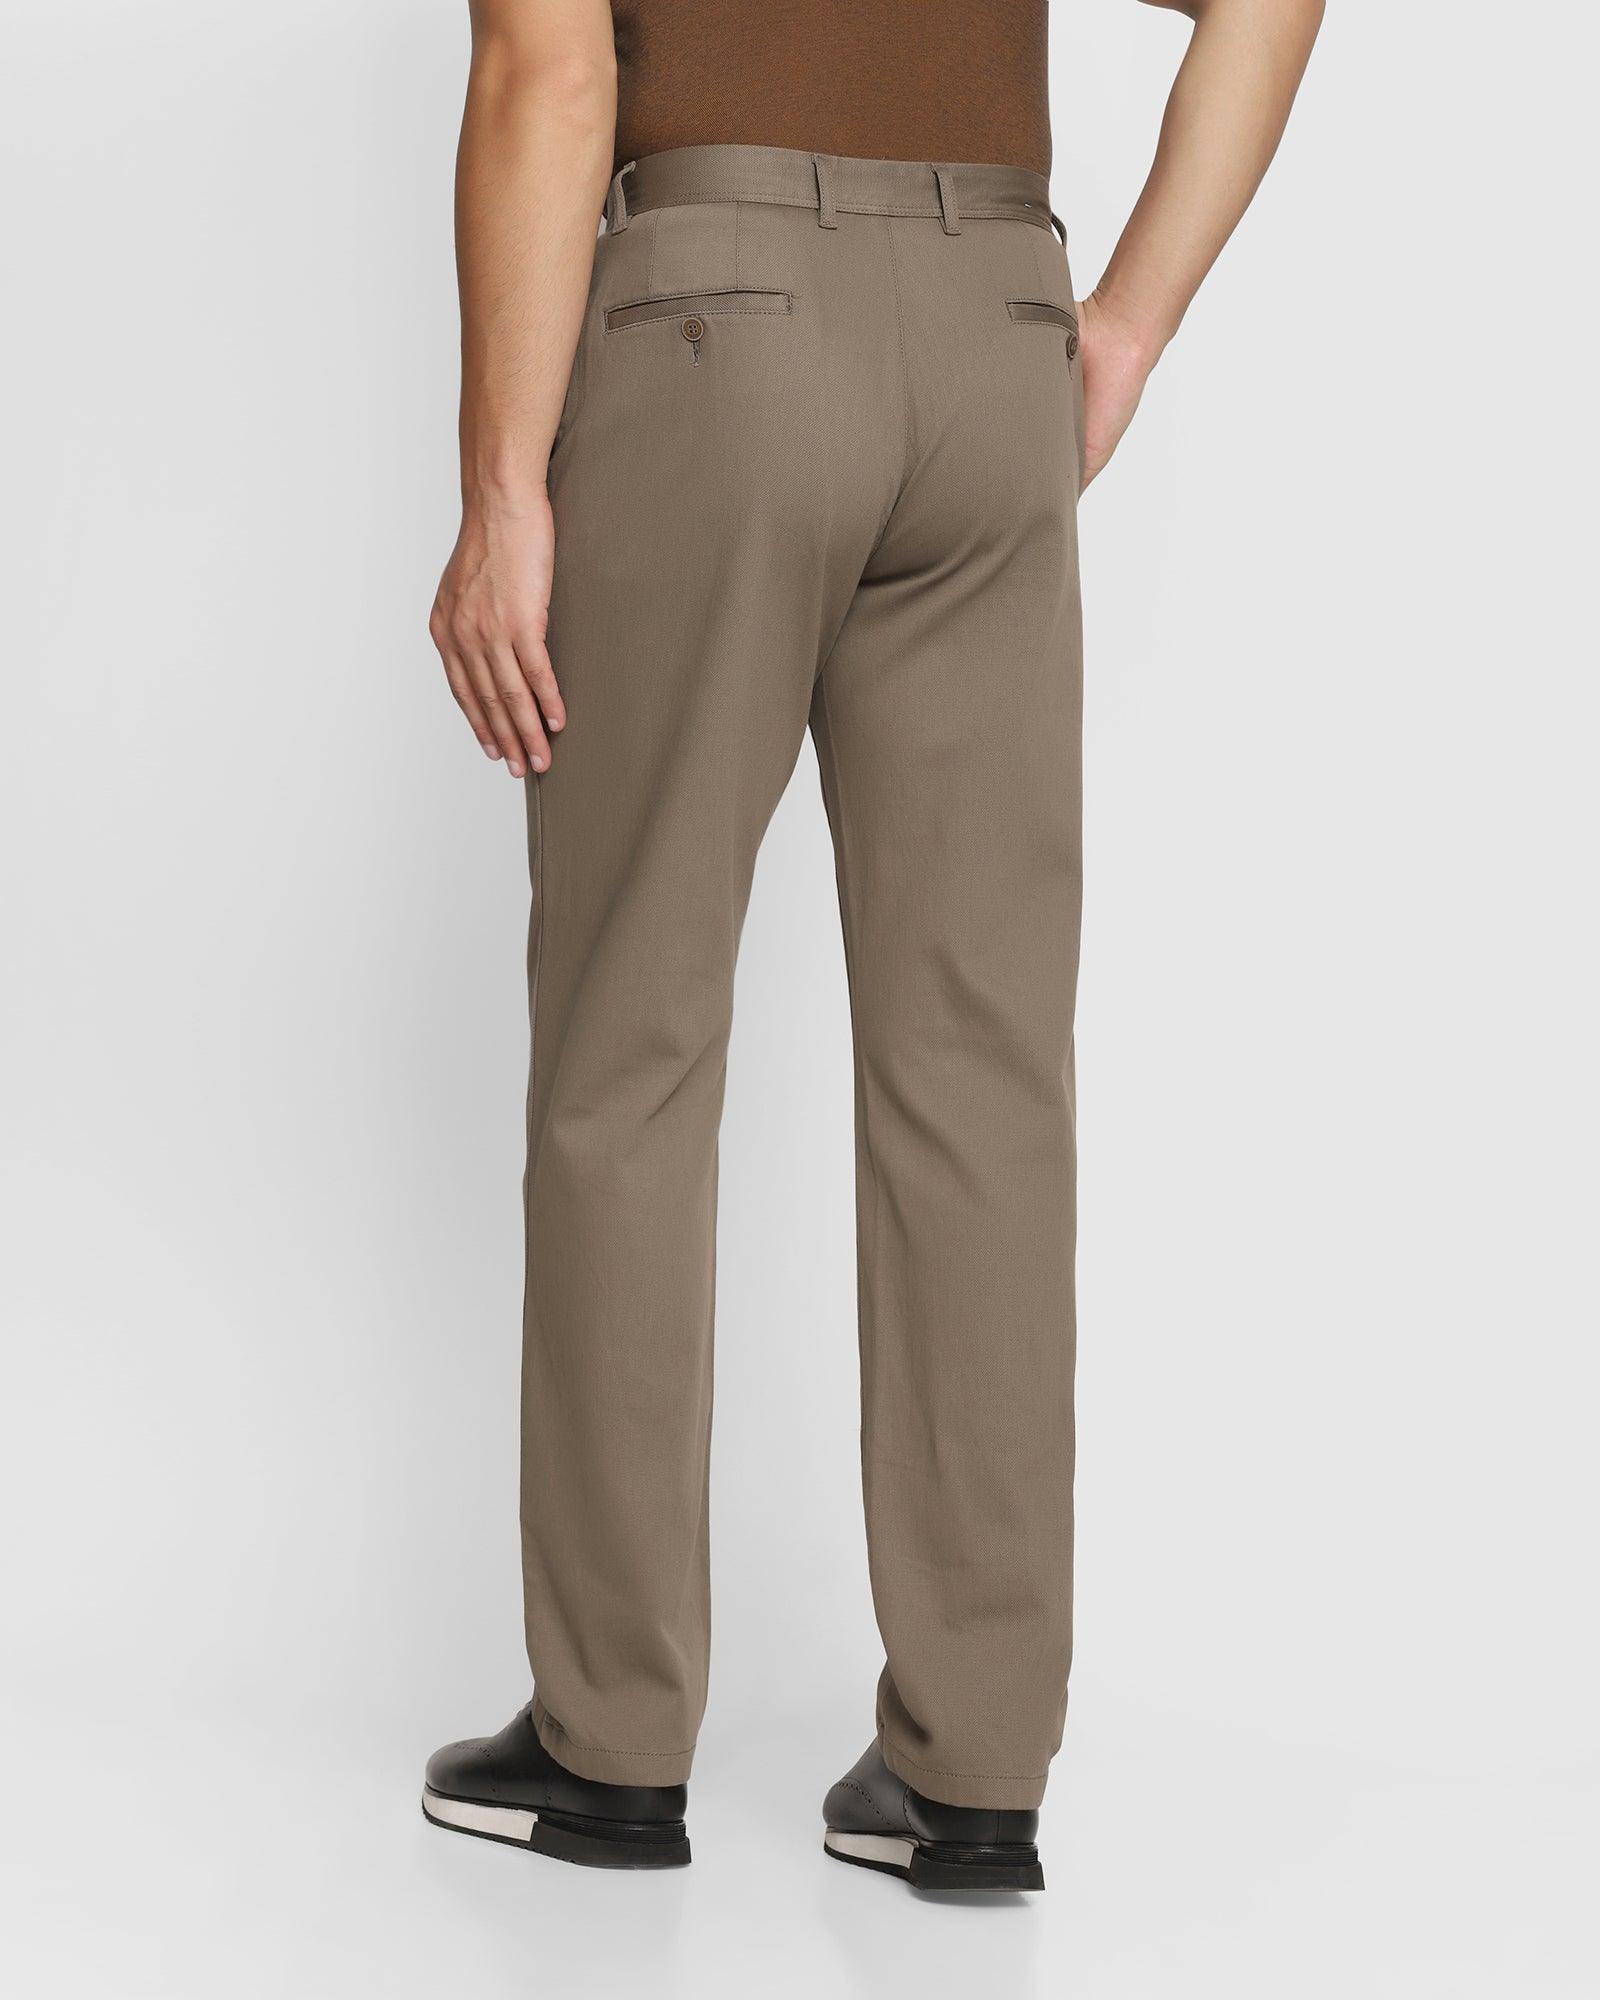 Straight B-90 Casual Mouse Textured Khakis - Regues